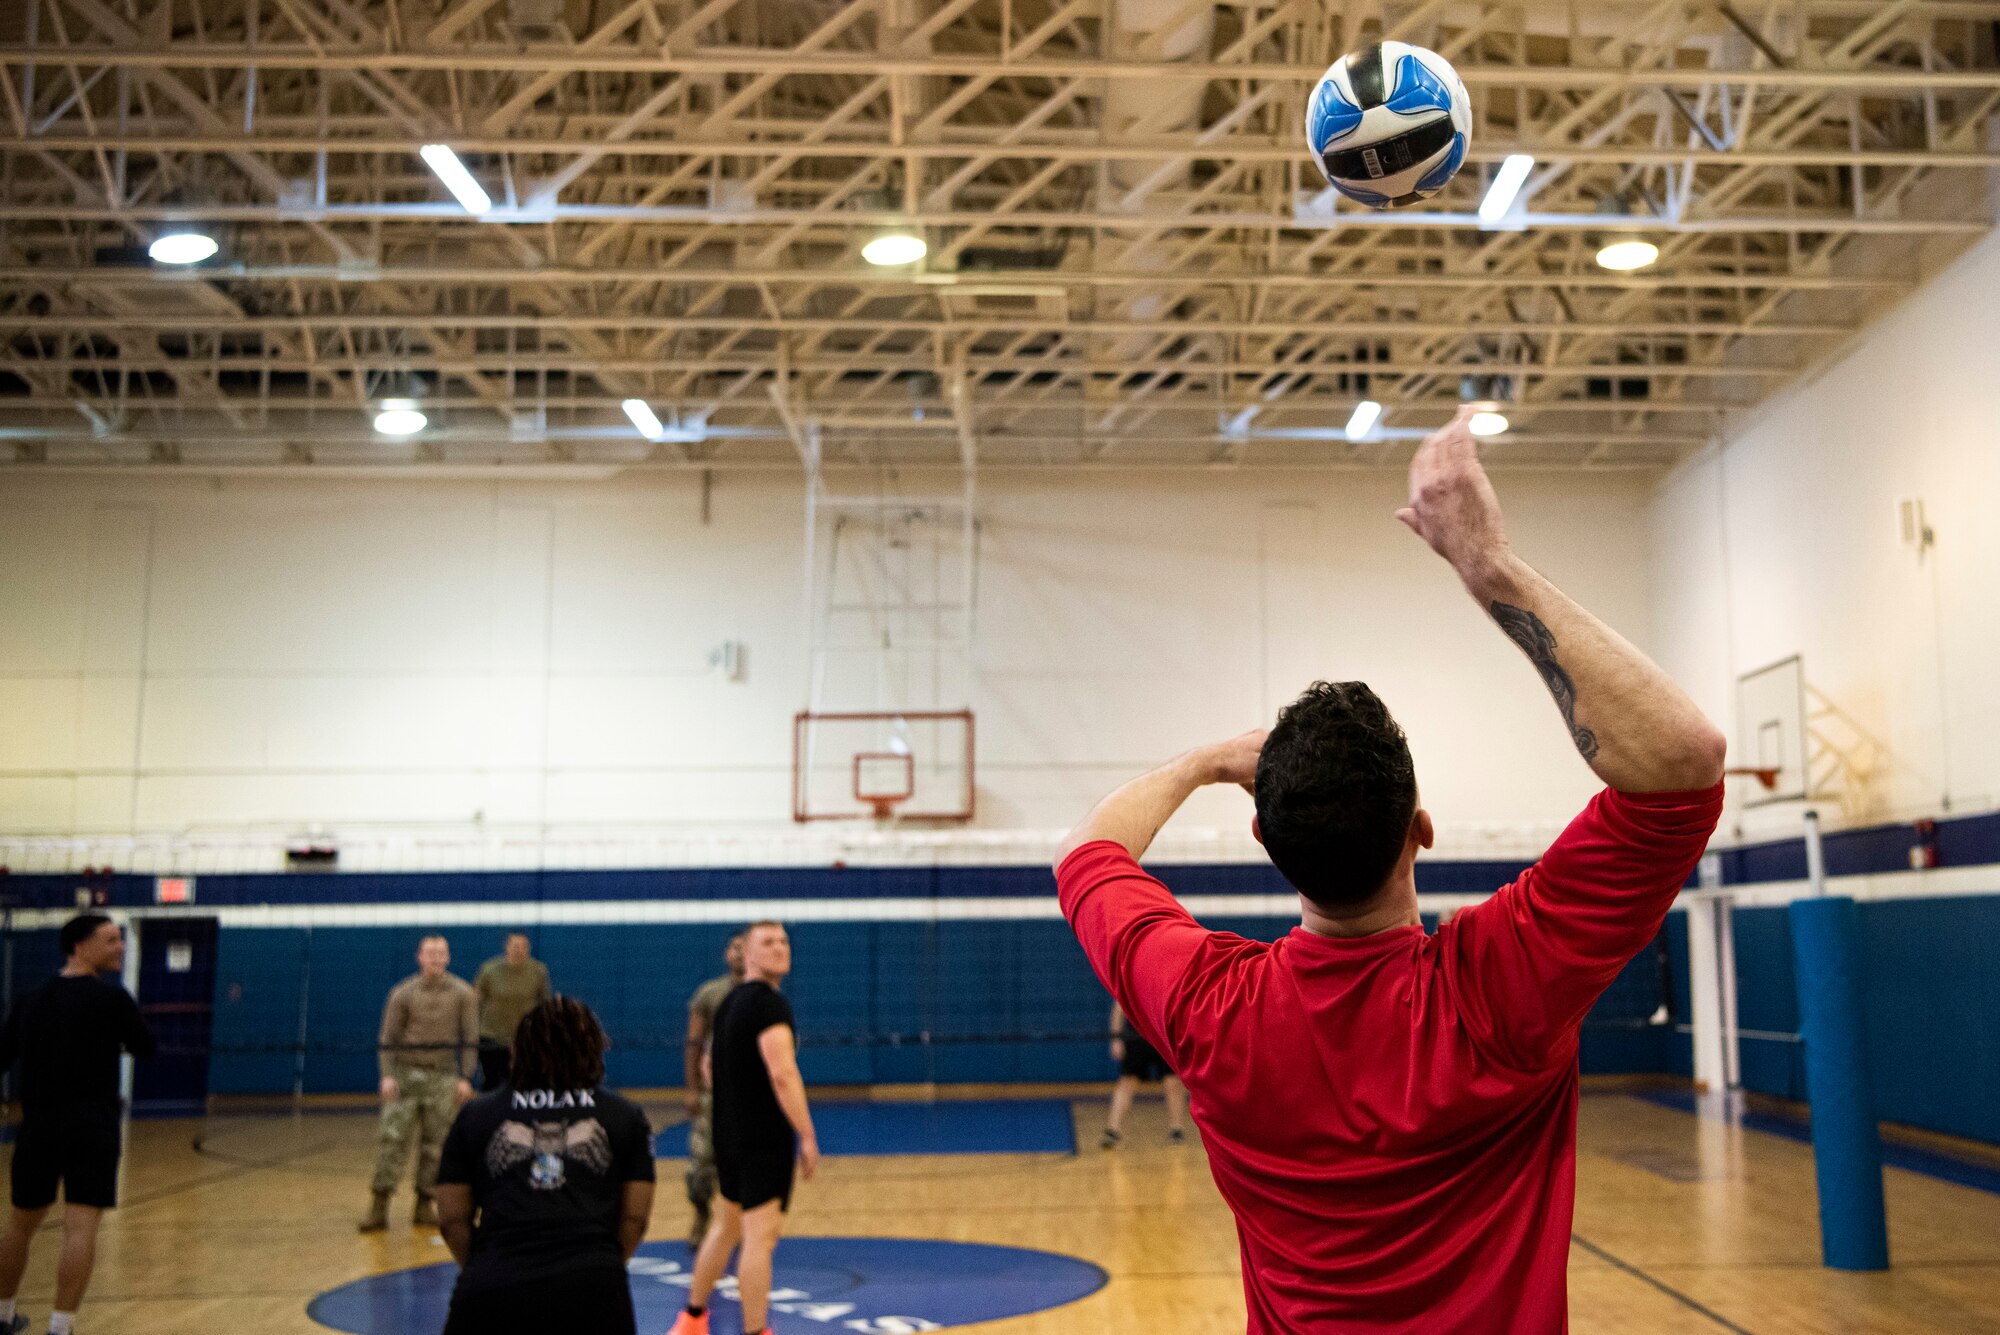 Airmen from across the 39th Air Base Wing participate in a volleyball tournament during the Air Force Assistance Fund kick-off event at Incirlik Air Base, Turkey, March 3, 2022. AFAF is a collection of four charities that combine their efforts to provide humanitarian assistance, educational support and financial aid to our Air Force family members in need.